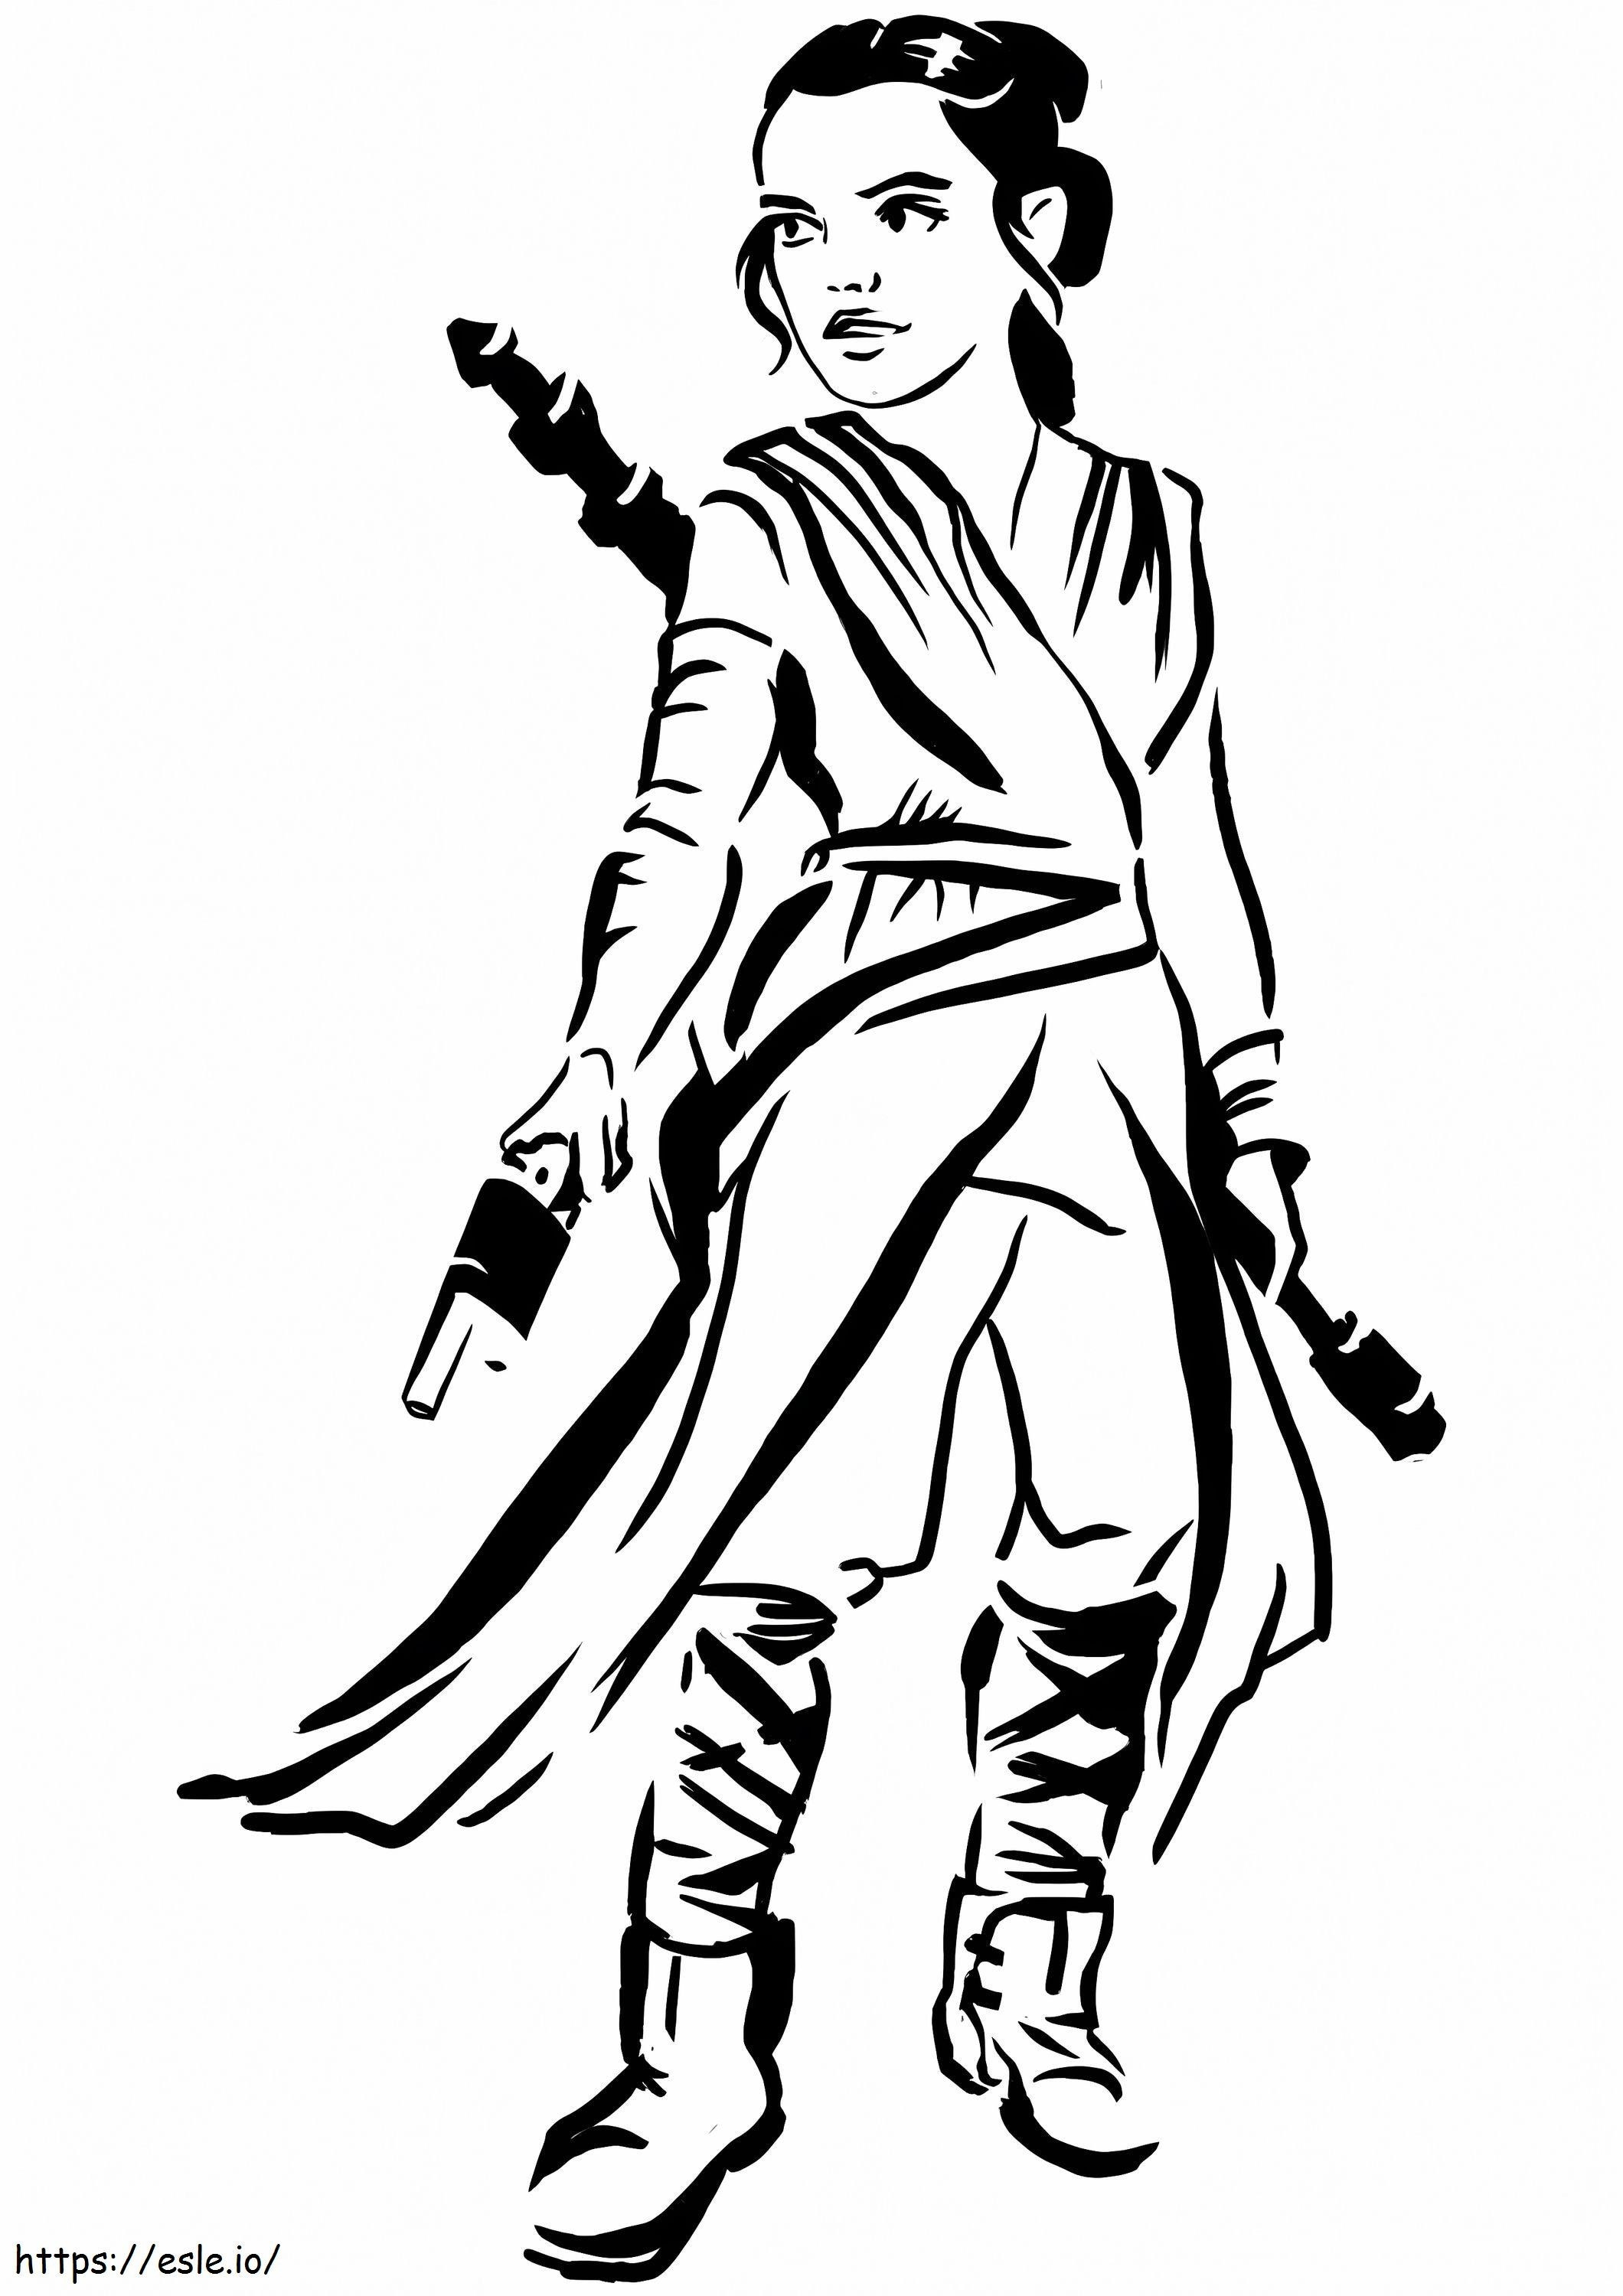 King Of Star Wars coloring page